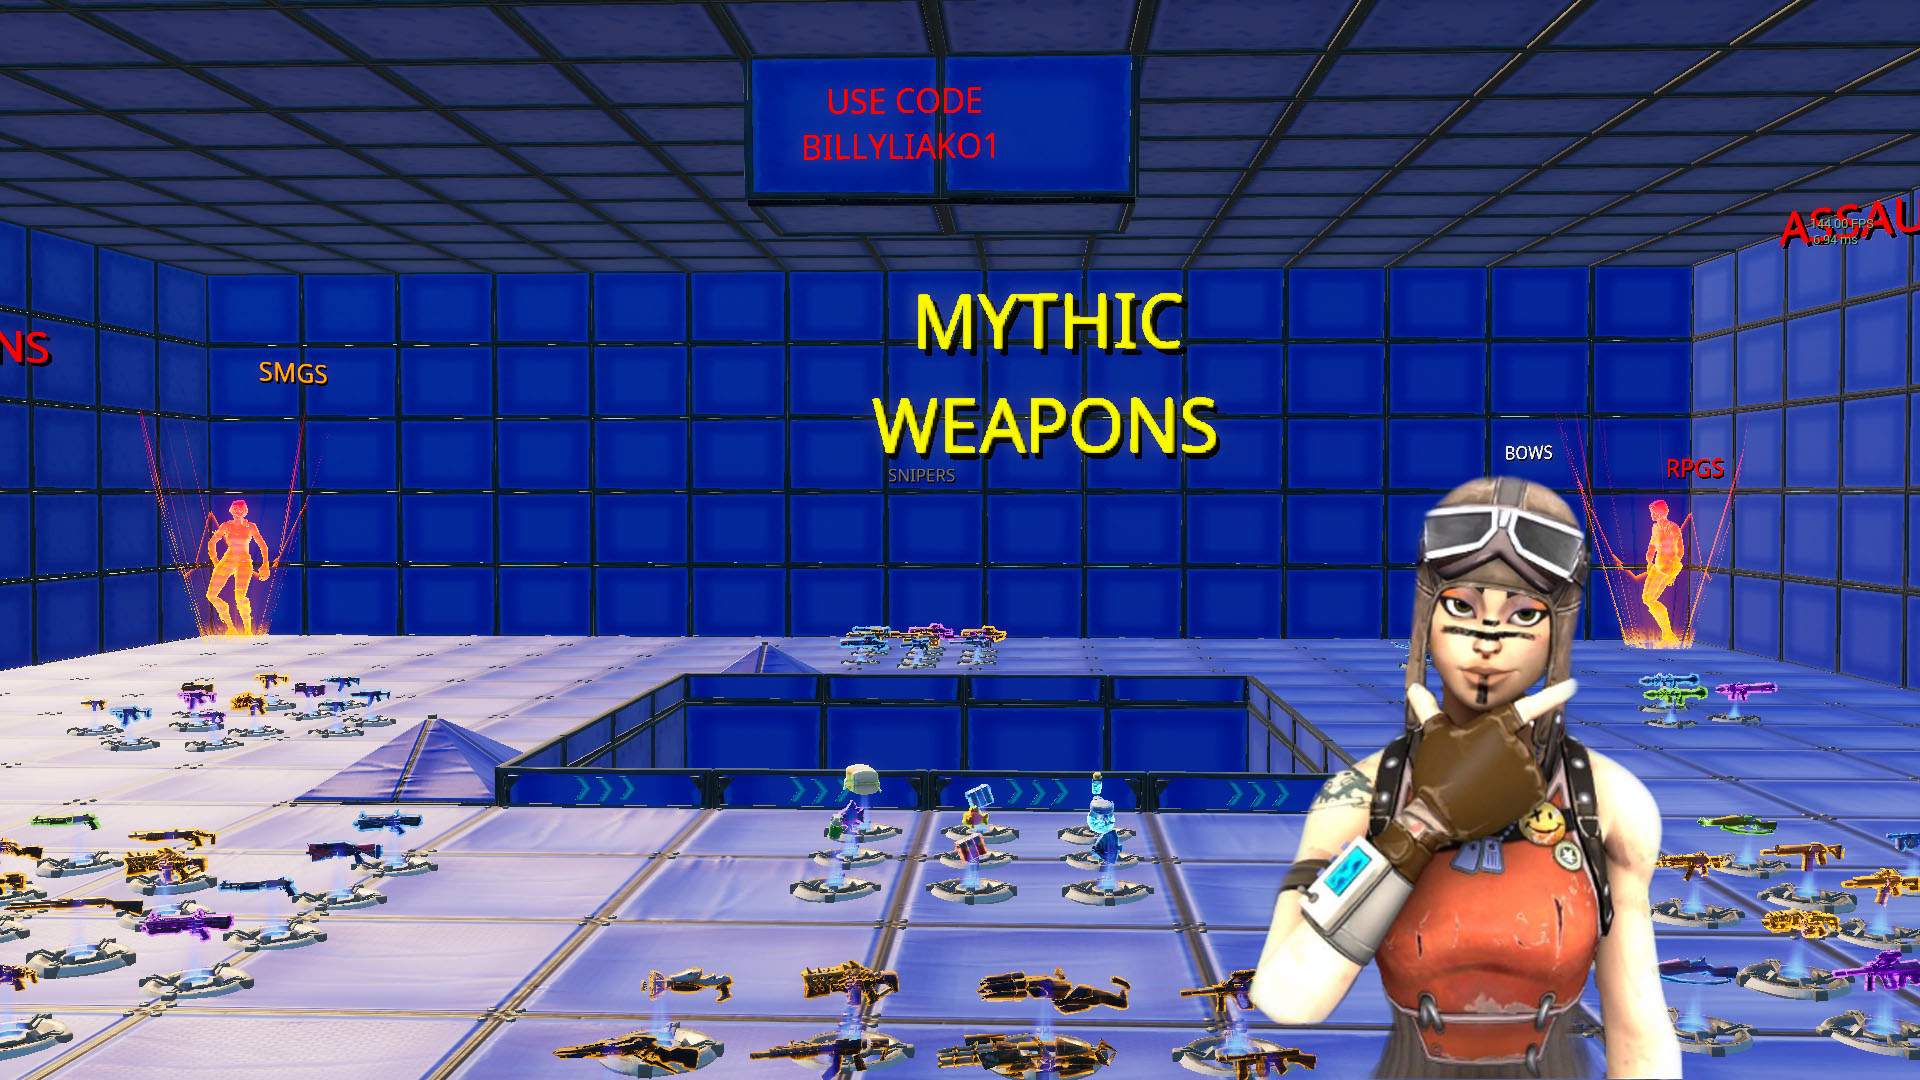 ✨ FREE FOR ALL - ALL WEAPONS + MYTHIC ✨